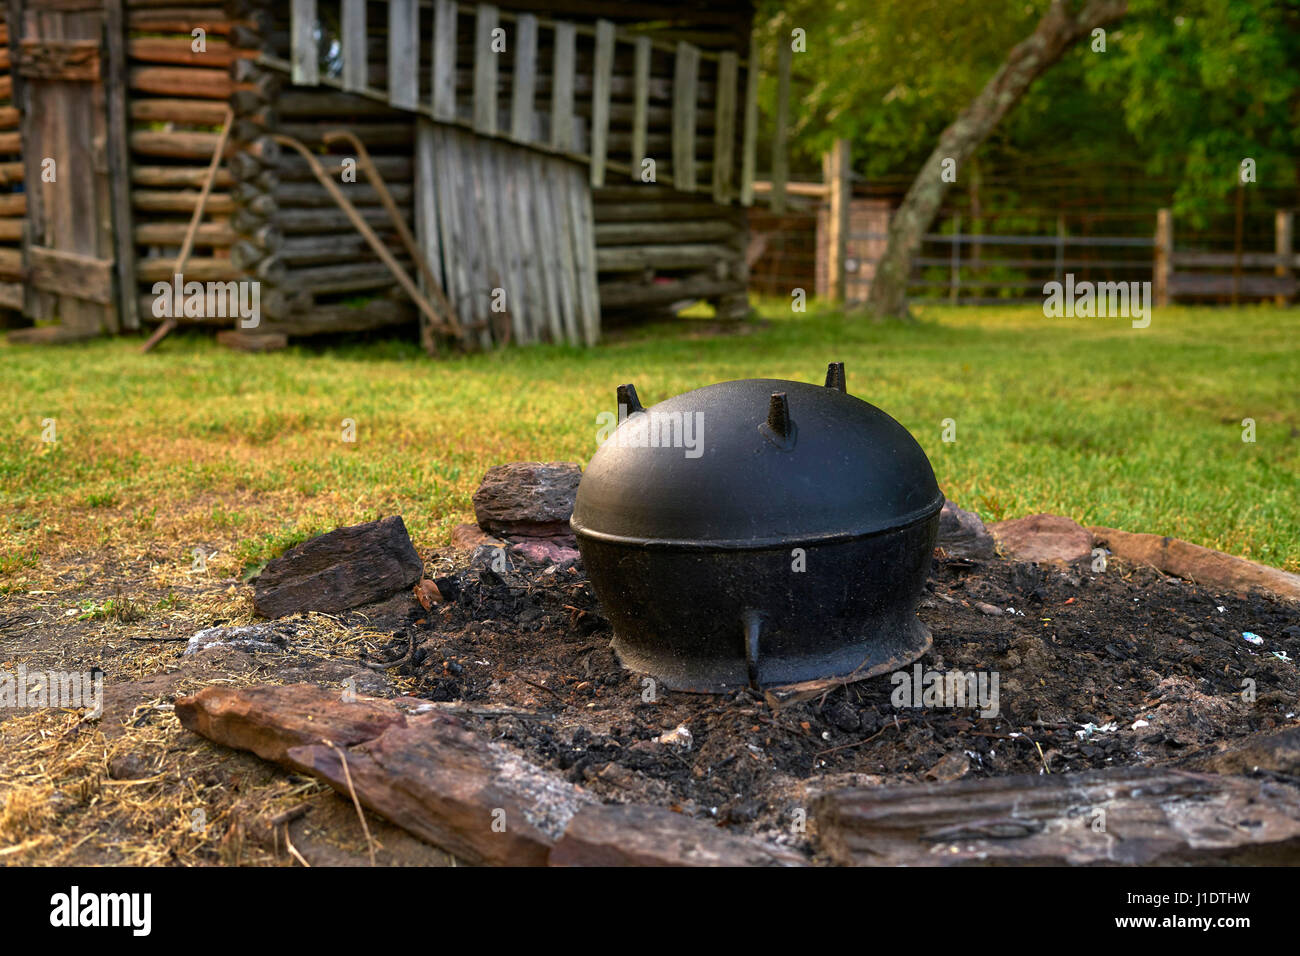 Cooking over an open fire in a cast iron pot used to be the standard, but that has given away to much more modern technology today. Stock Photo